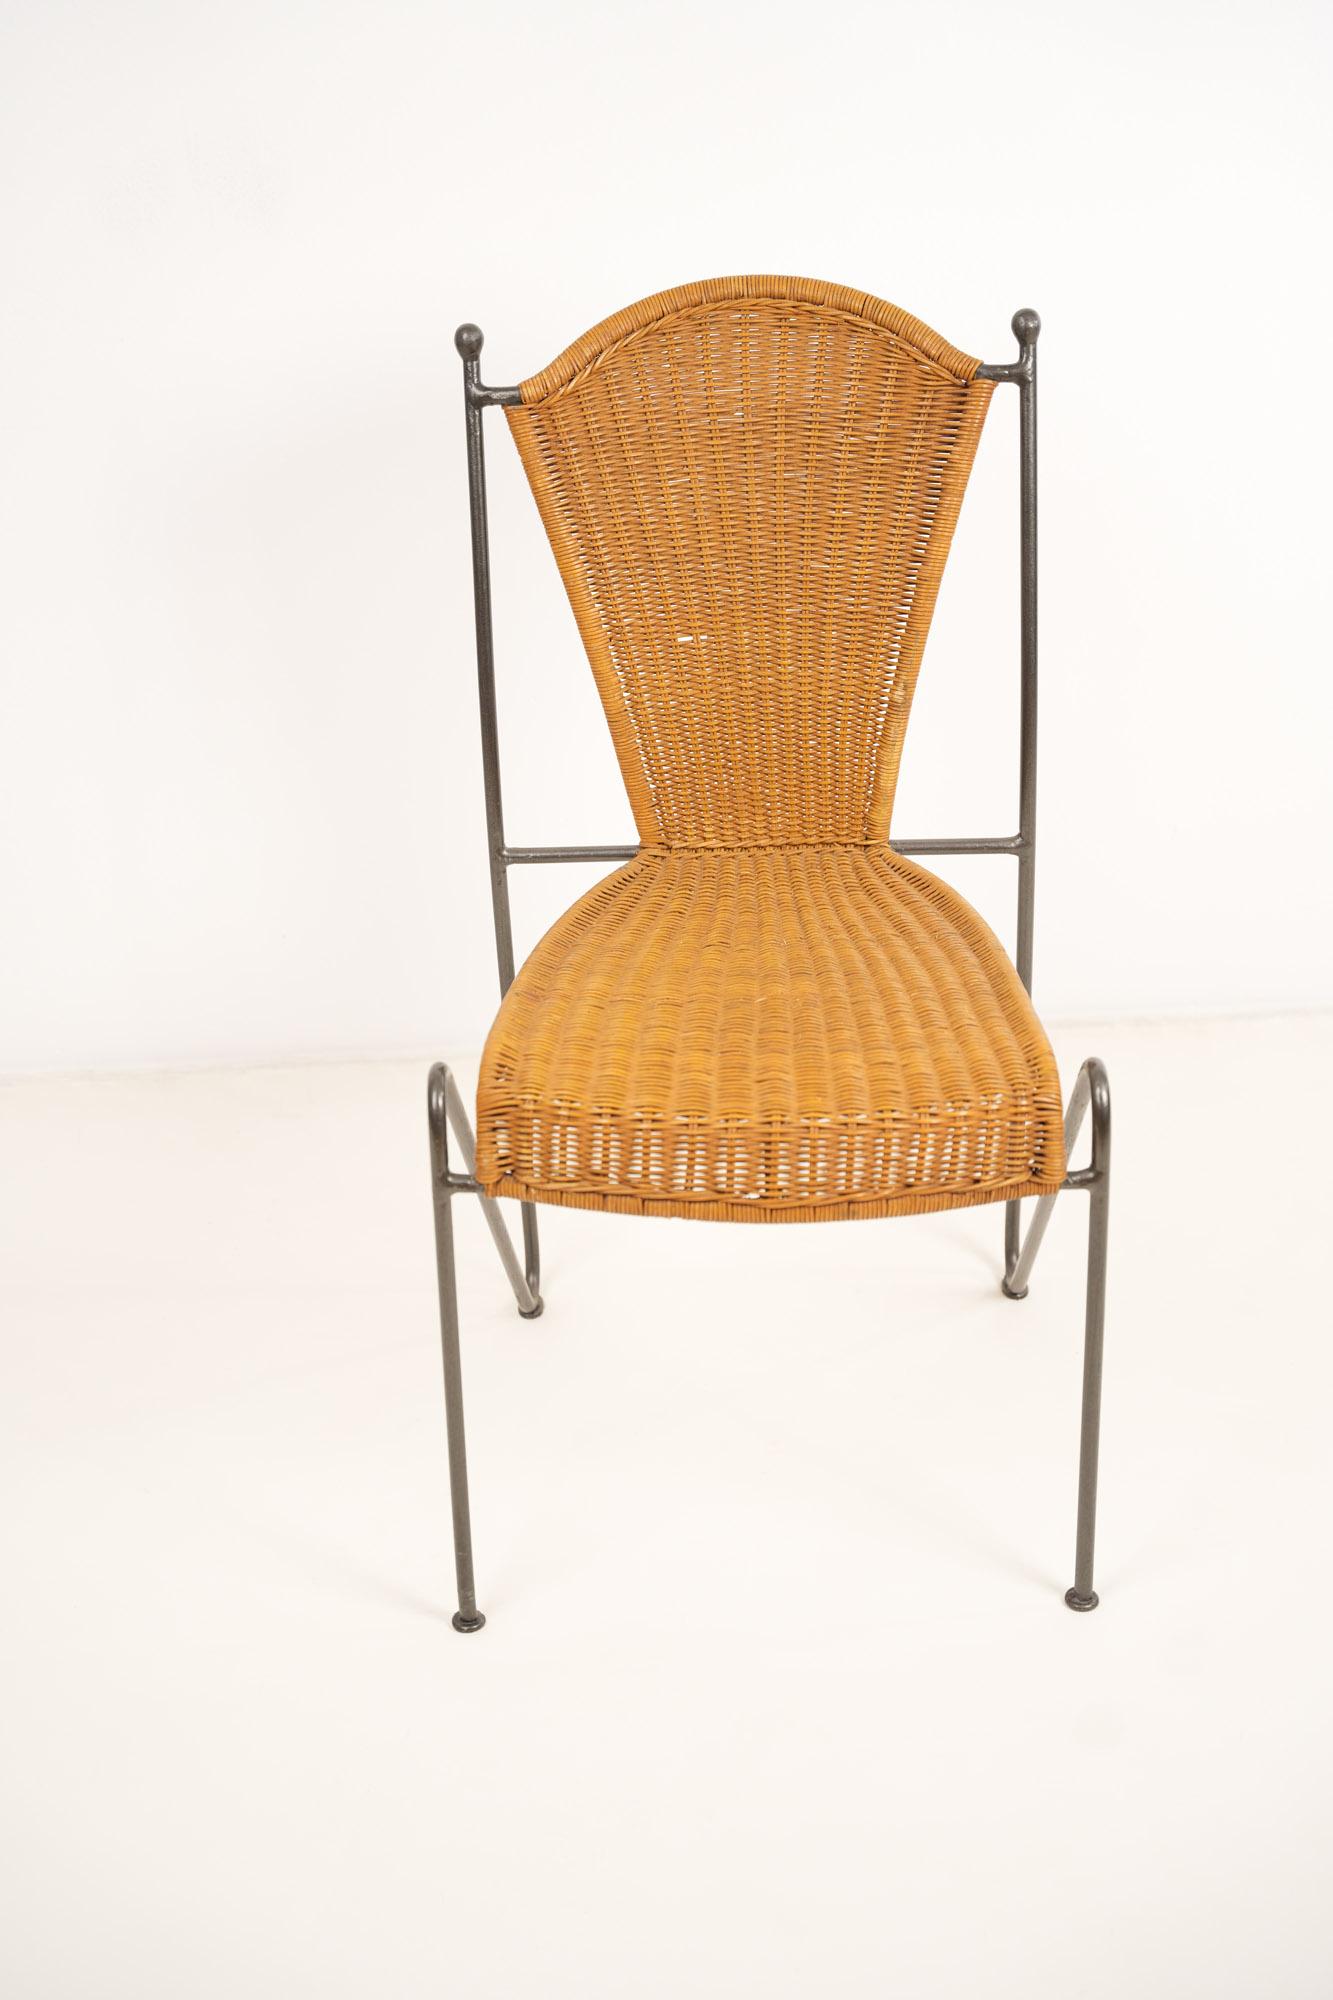 Wicker and Iron Chair by Frederic Weinberg 1950s